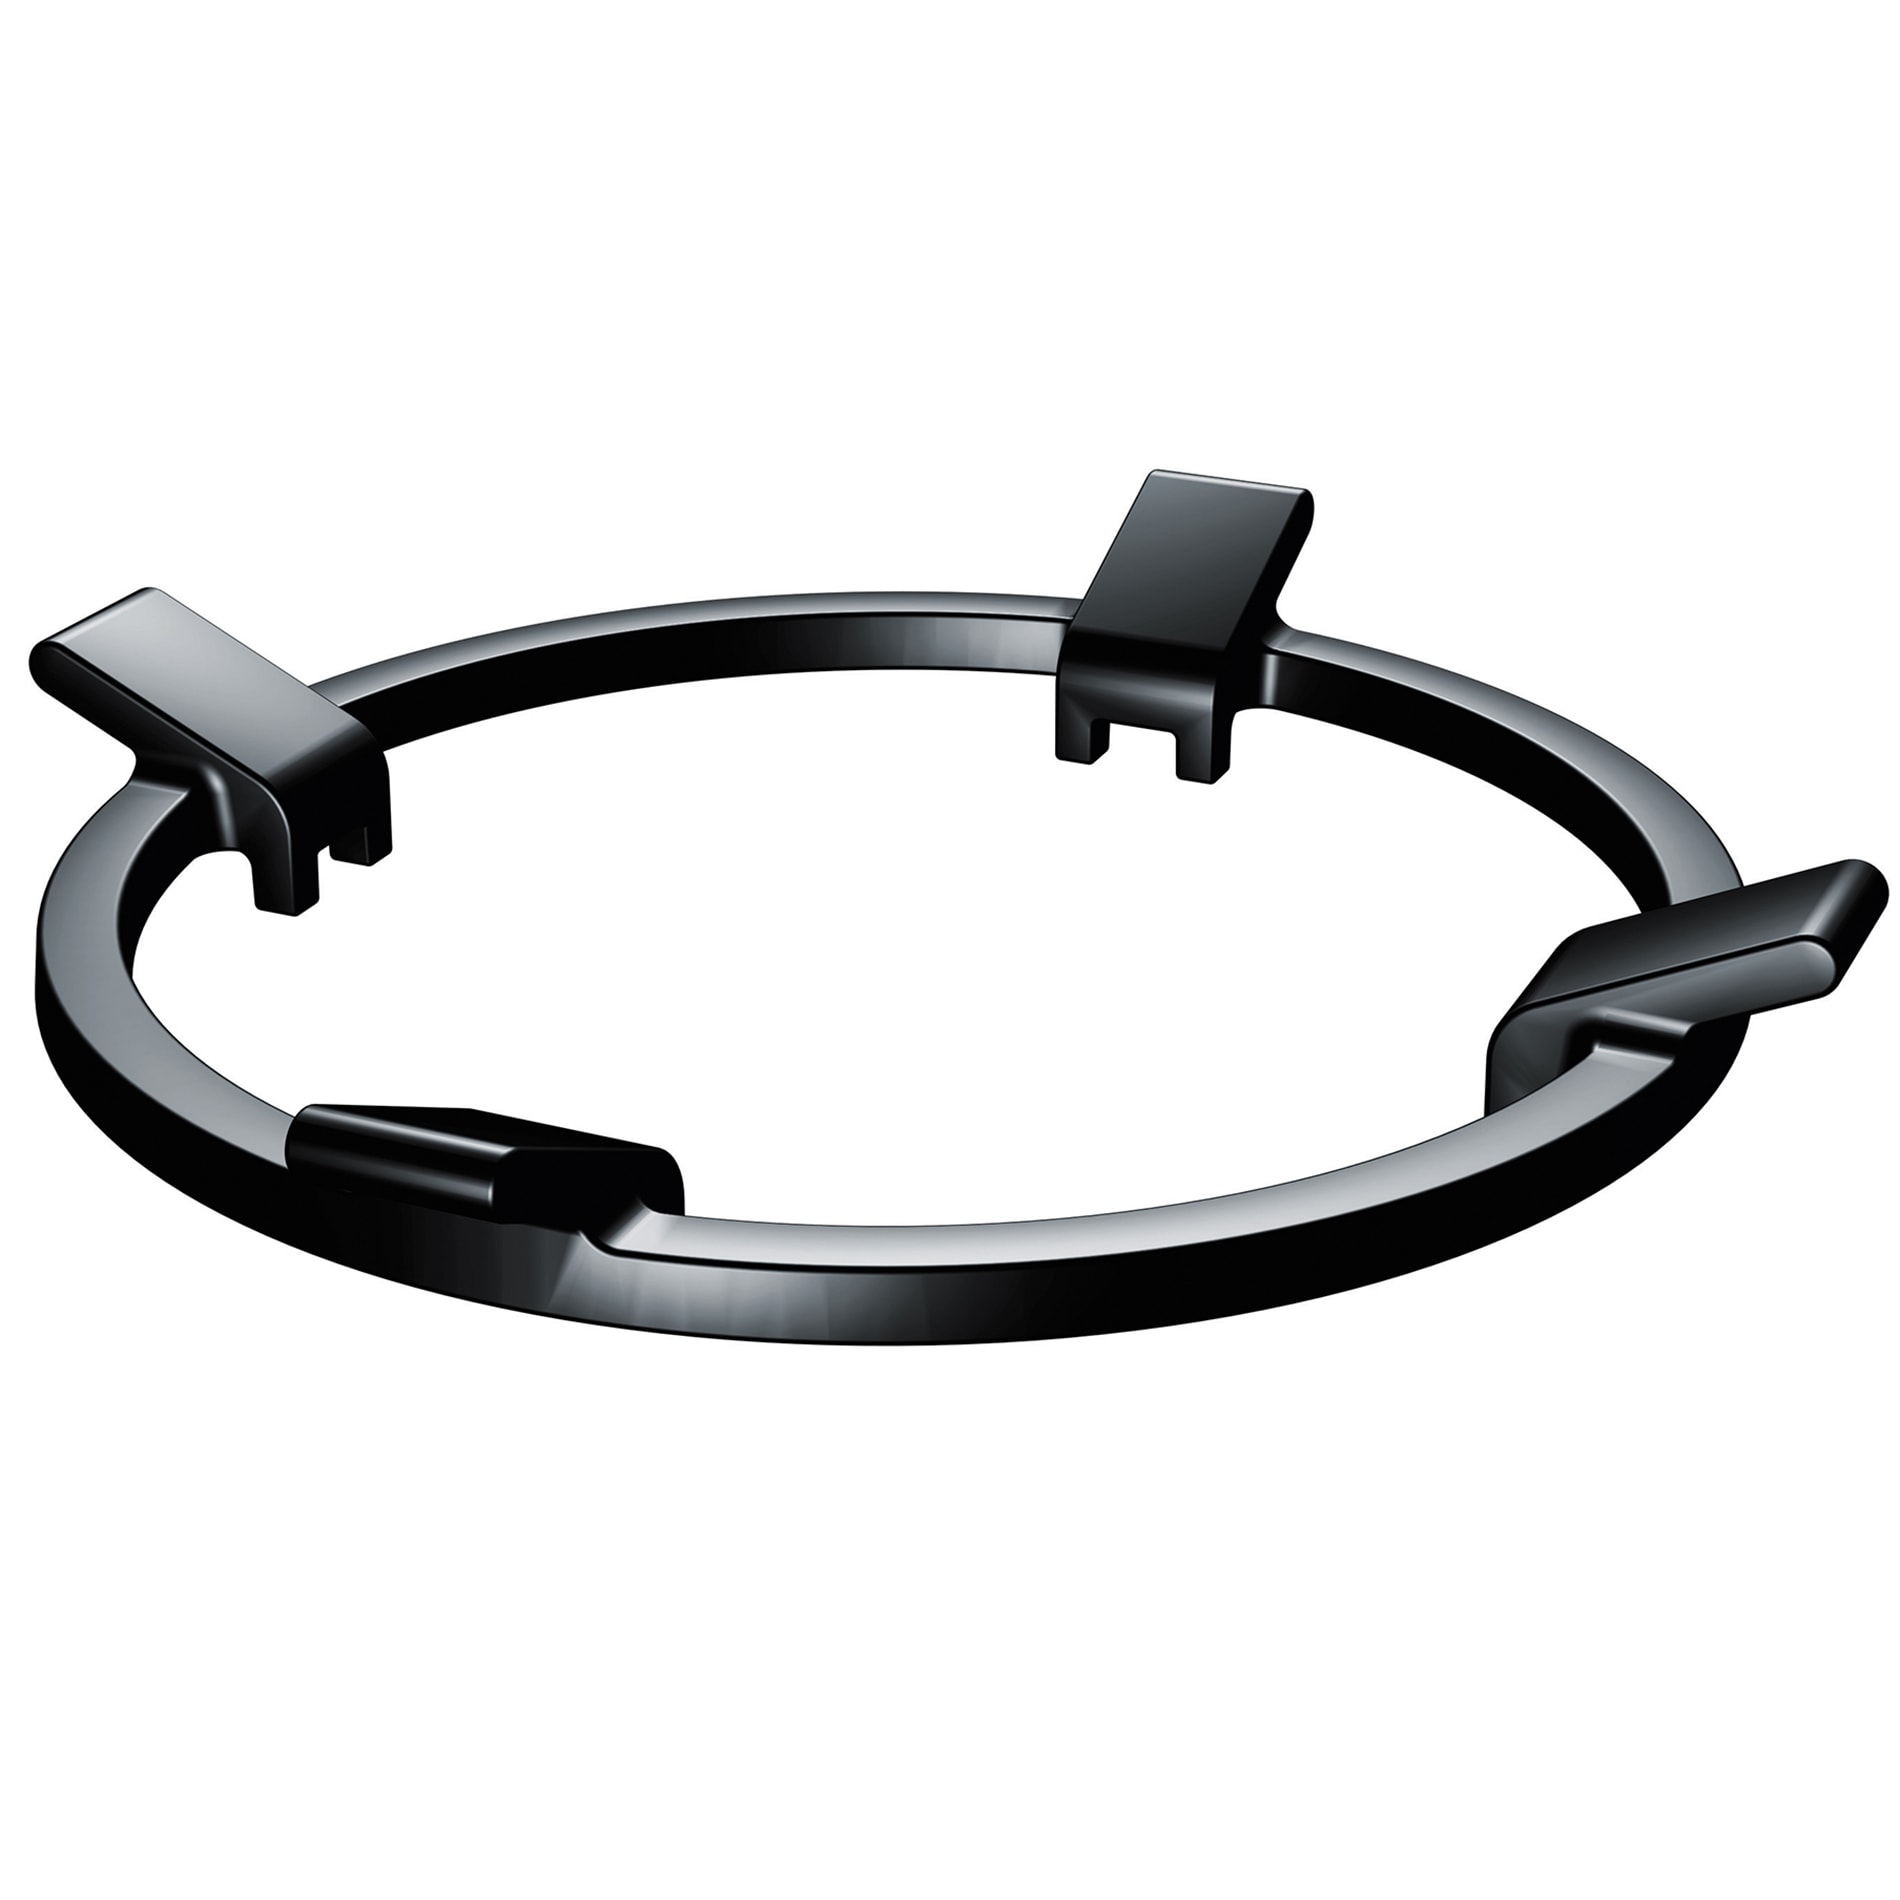 Electrolux - 318254307 - Wok Ring for Gas Ranges and Cooktops